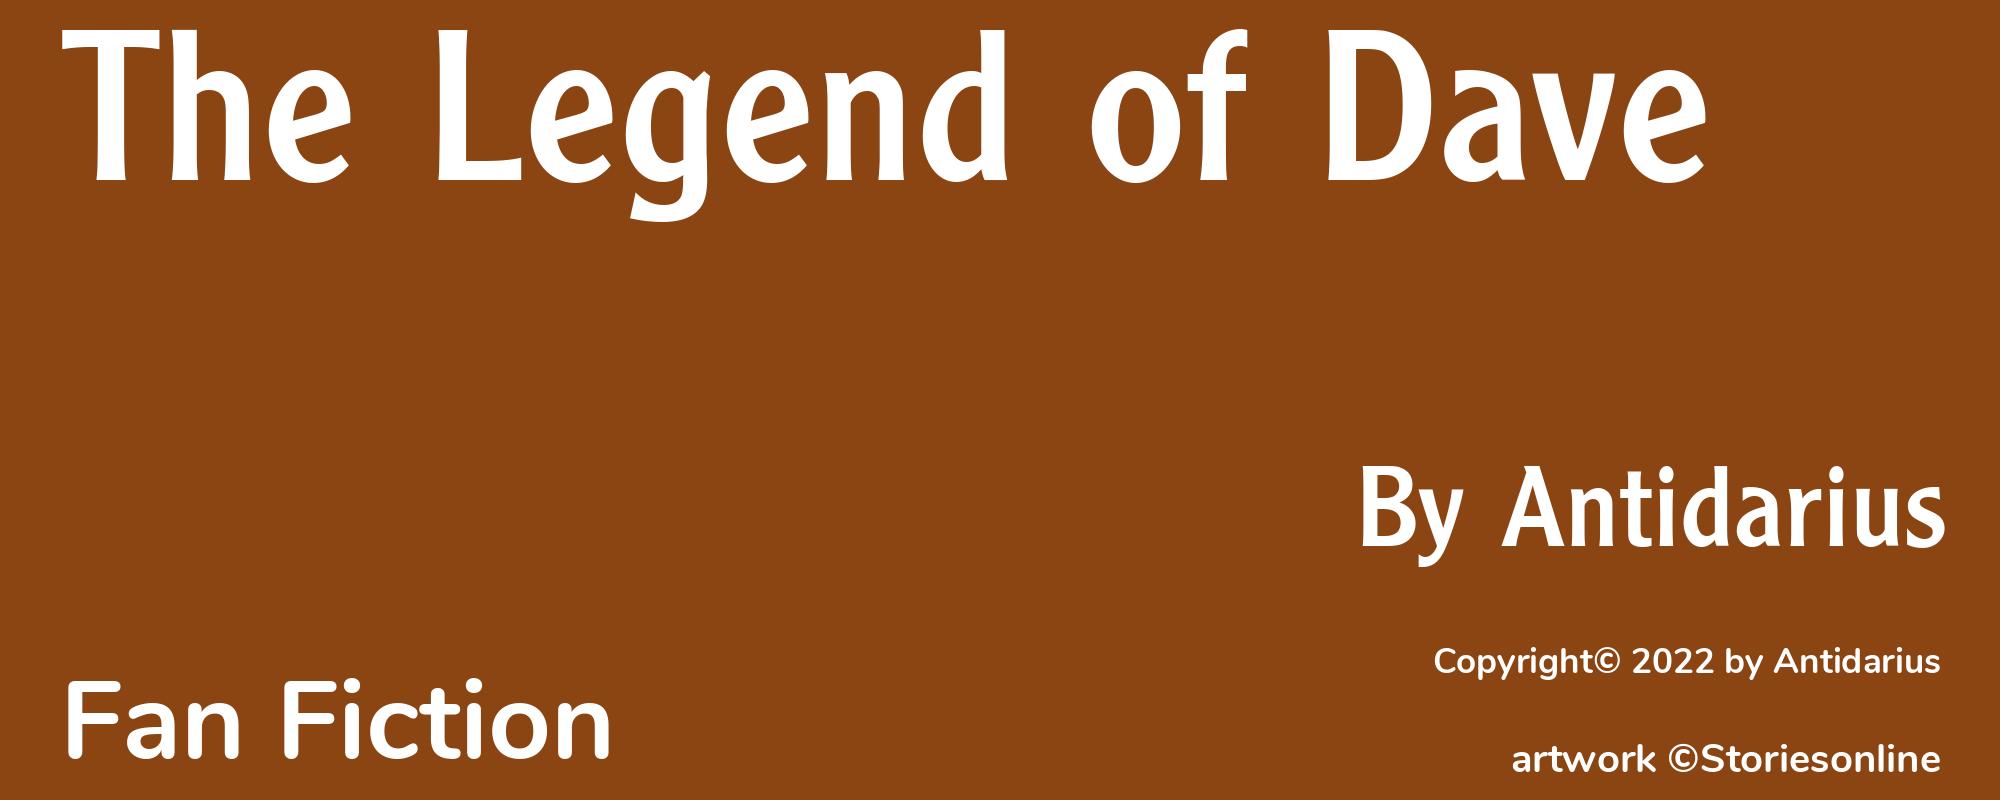 The Legend of Dave - Cover